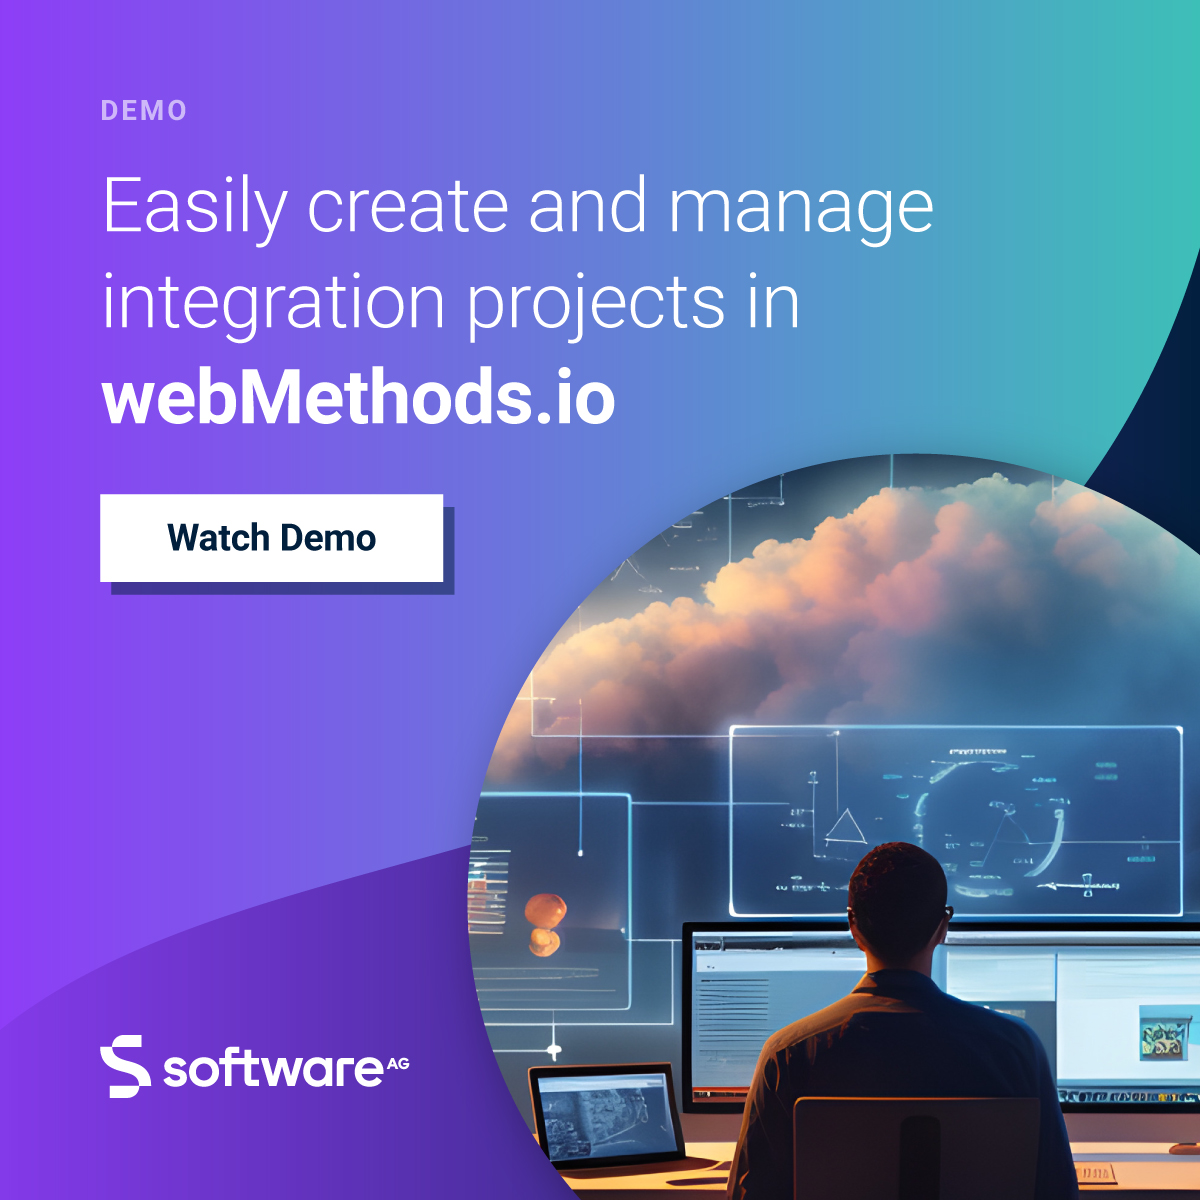 Learn the ins and outs of creating and managing webMethods.io integration projects for better collaboration and agility. Check it out: bit.ly/4an08kb

#webmethods #digitaltransformation #integration